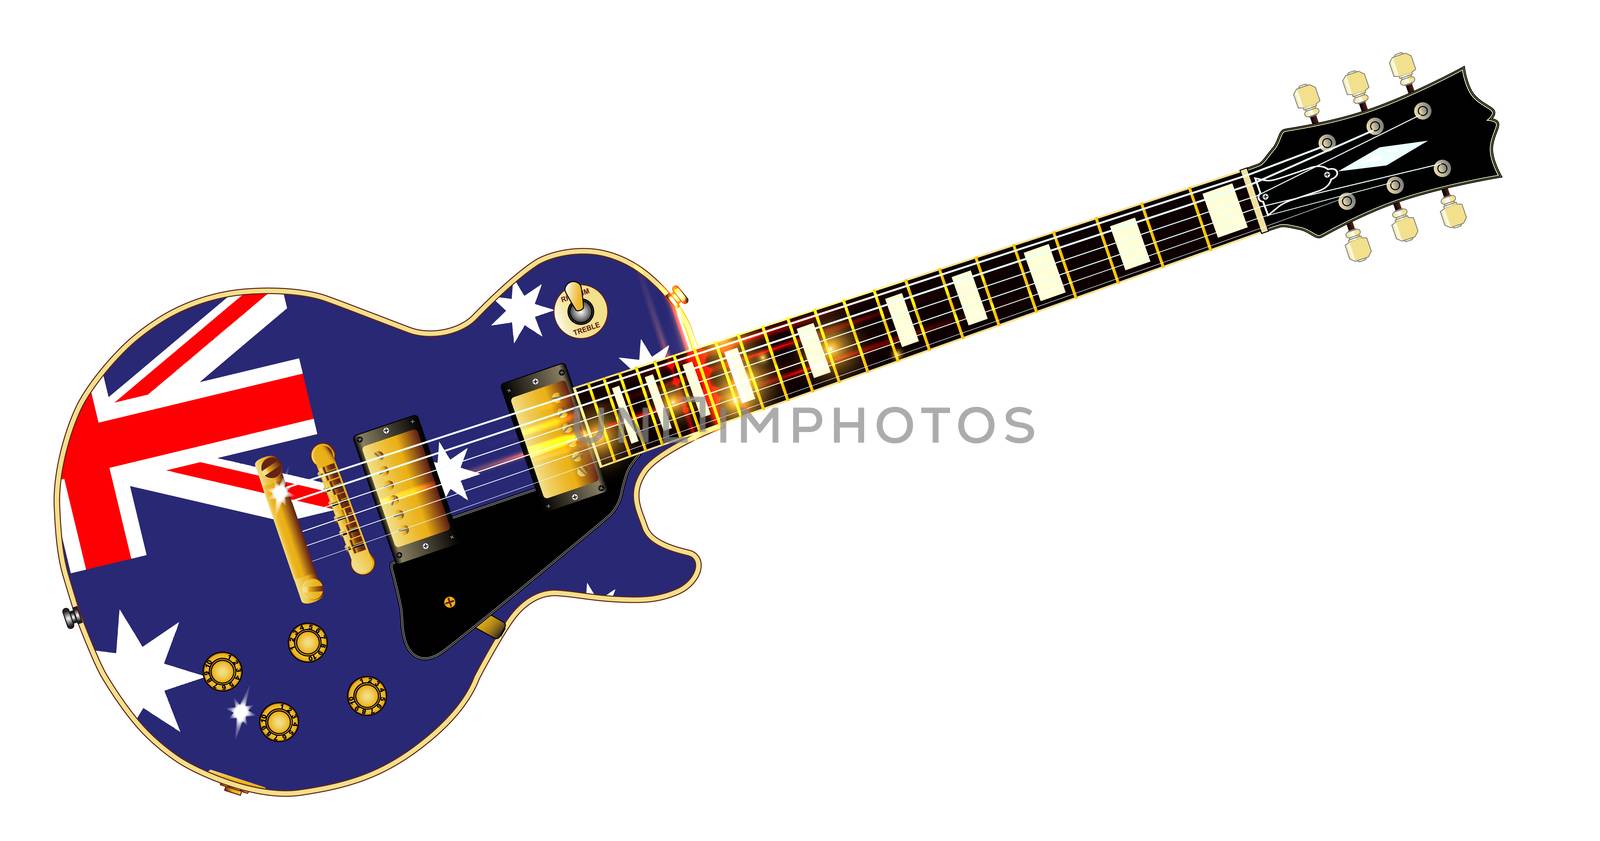 The definitive rock and roll guitar with the Australian flag isolated over a white background.